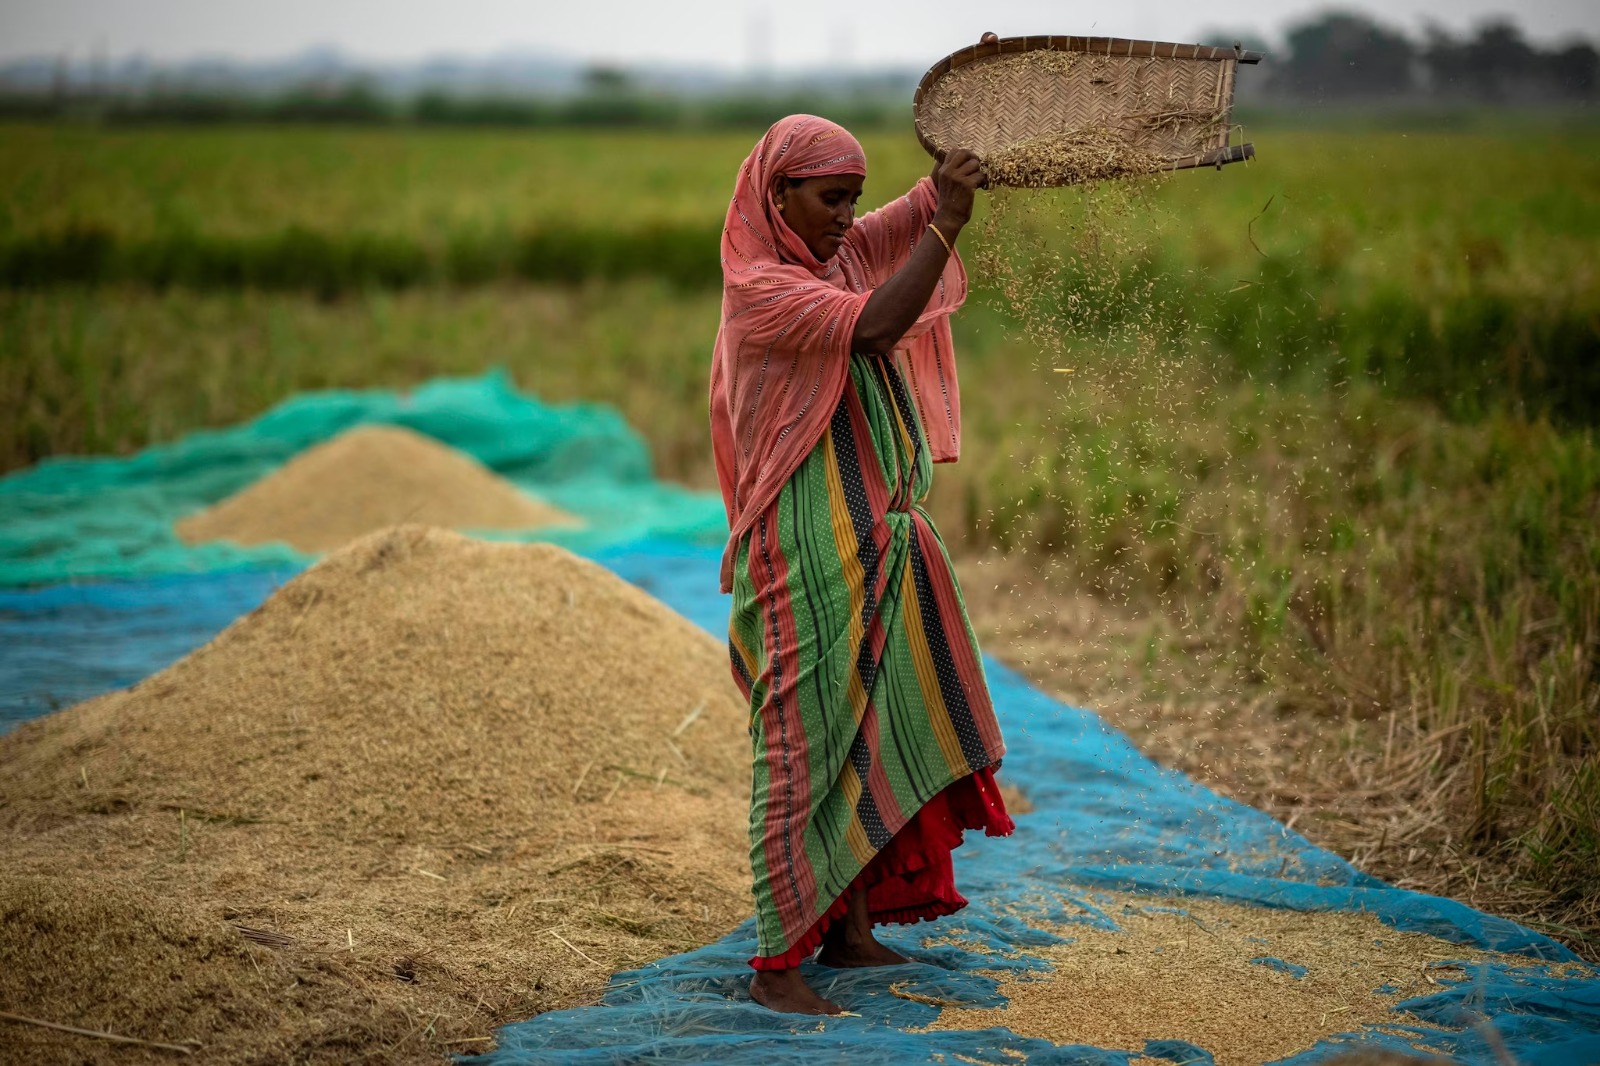 'India likely to cut floor price for basmati rice exports, sources say'